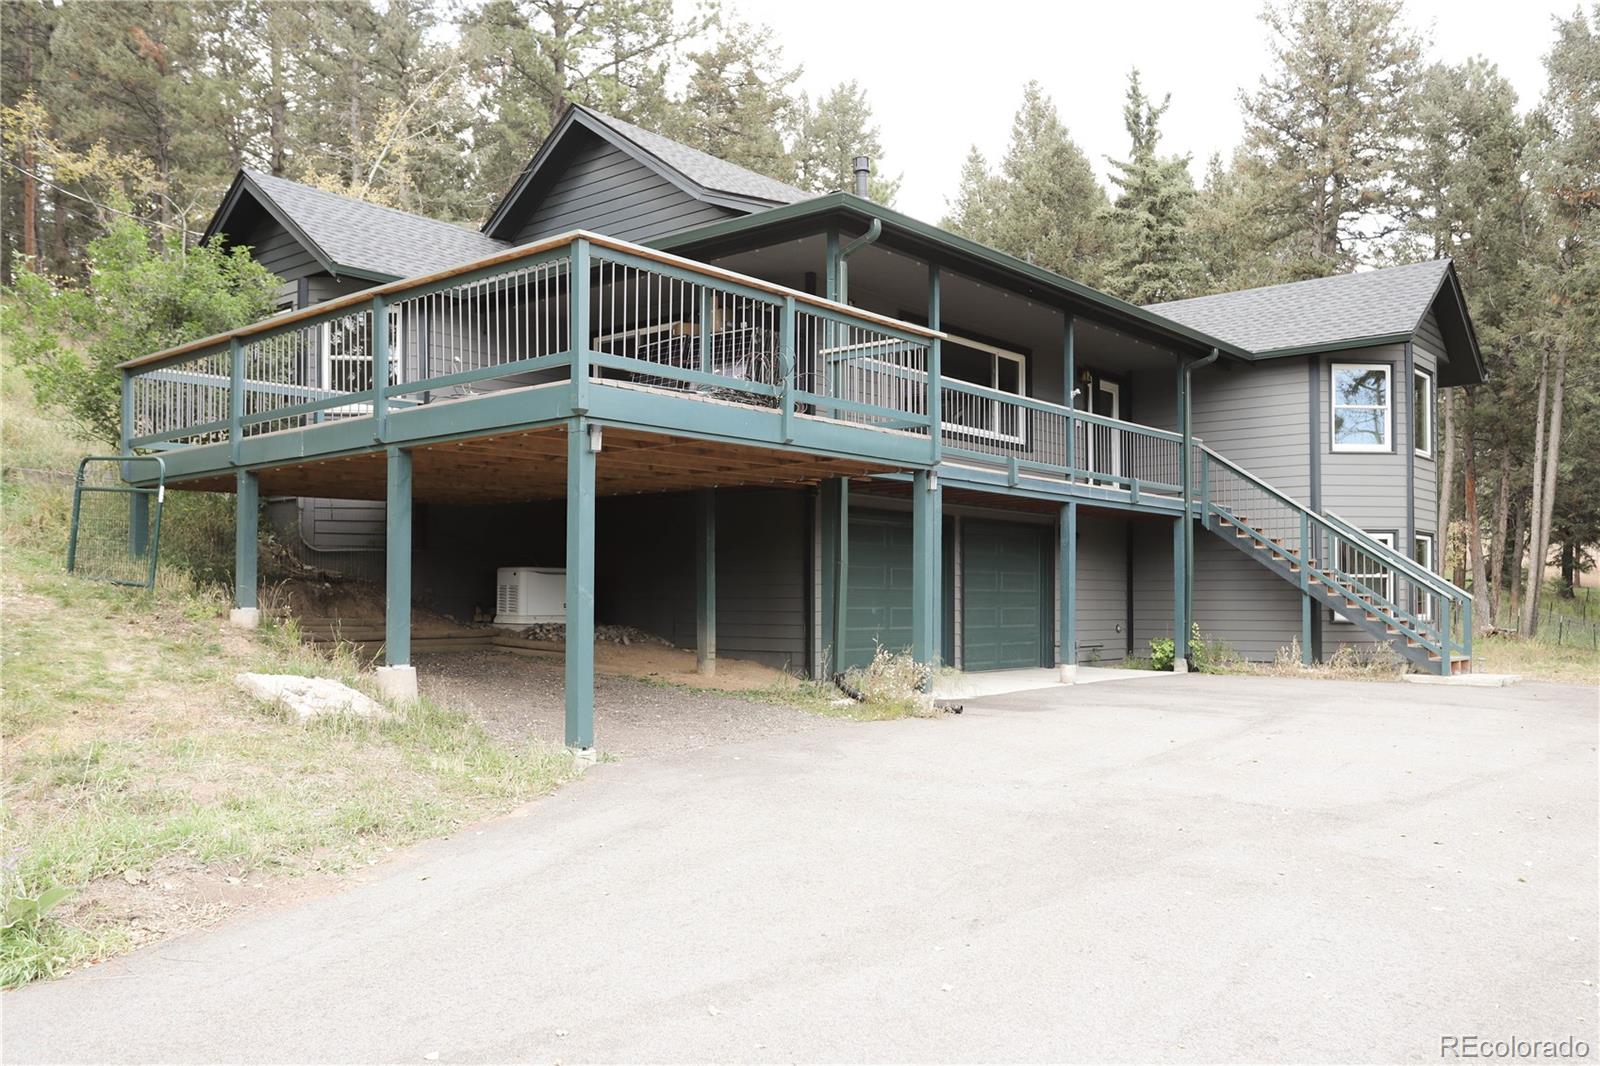 27053  arrowhead lane, conifer sold home. Closed on 2024-03-25 for $870,000.